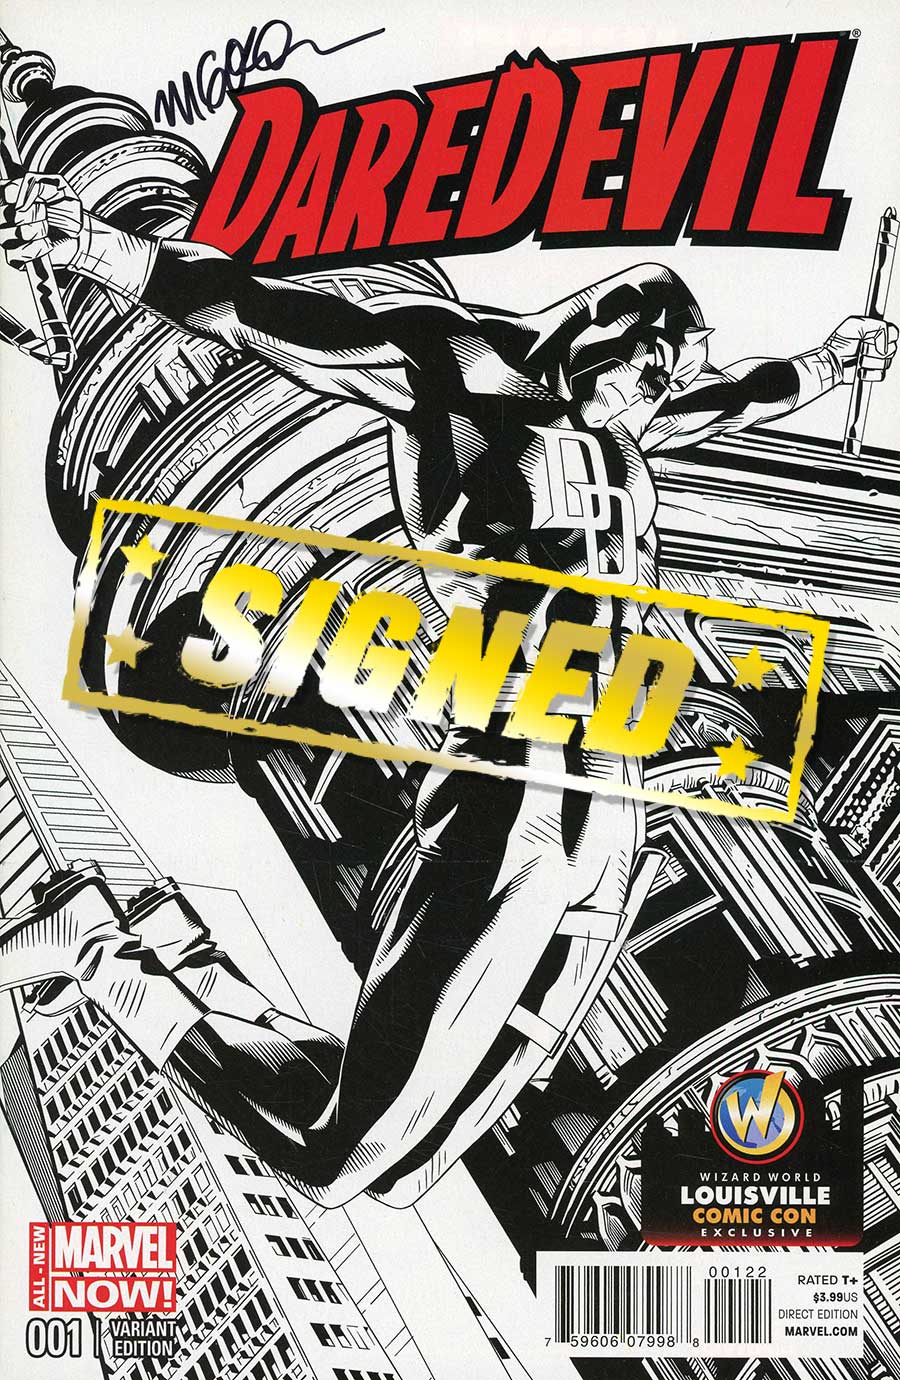 Daredevil Vol 4 #1 Cover K Wizard World Louisville Comic Con Exclusive Michael Golden Black & White Variant Cover Signed By Michael Golden